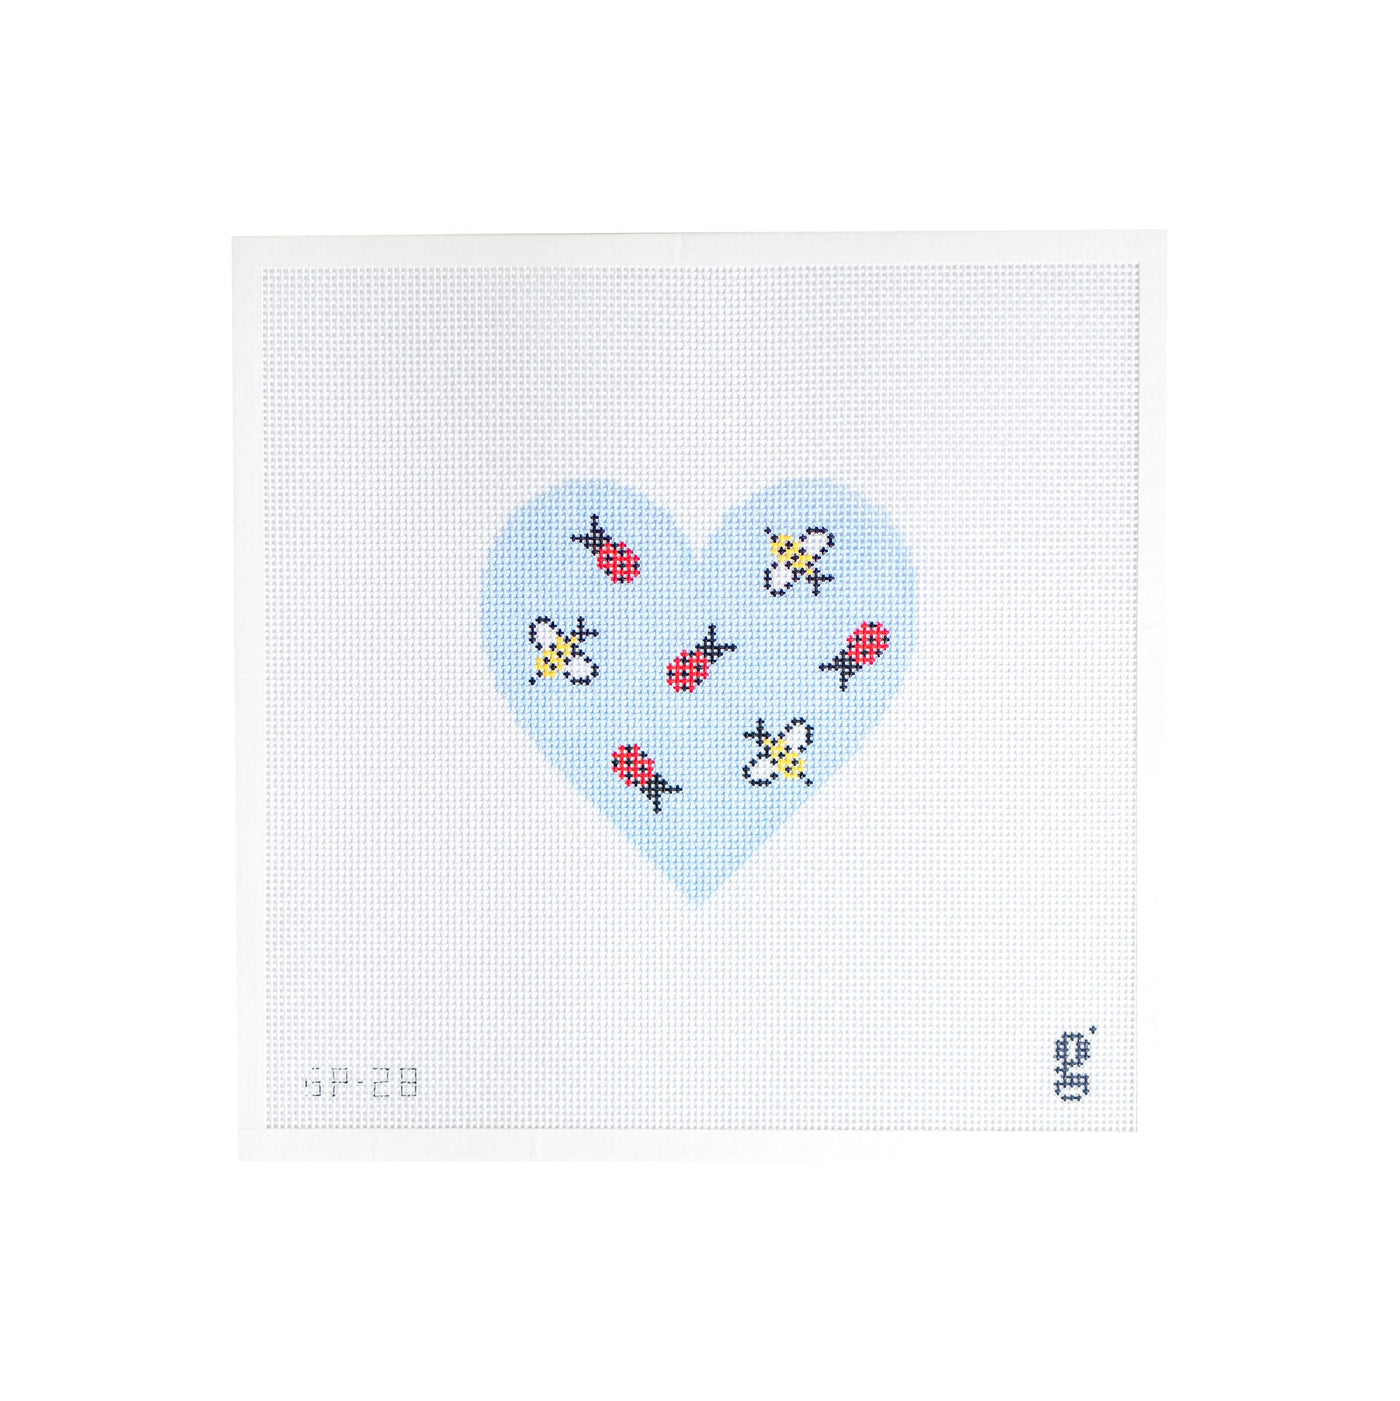 White square shaped needlepoint canvas with blue heart in the center. Inside the heart are tossed ladybugs and bumblebees. The goodpoint logo is at bottom right corner and the SKU is at bottom left corner.